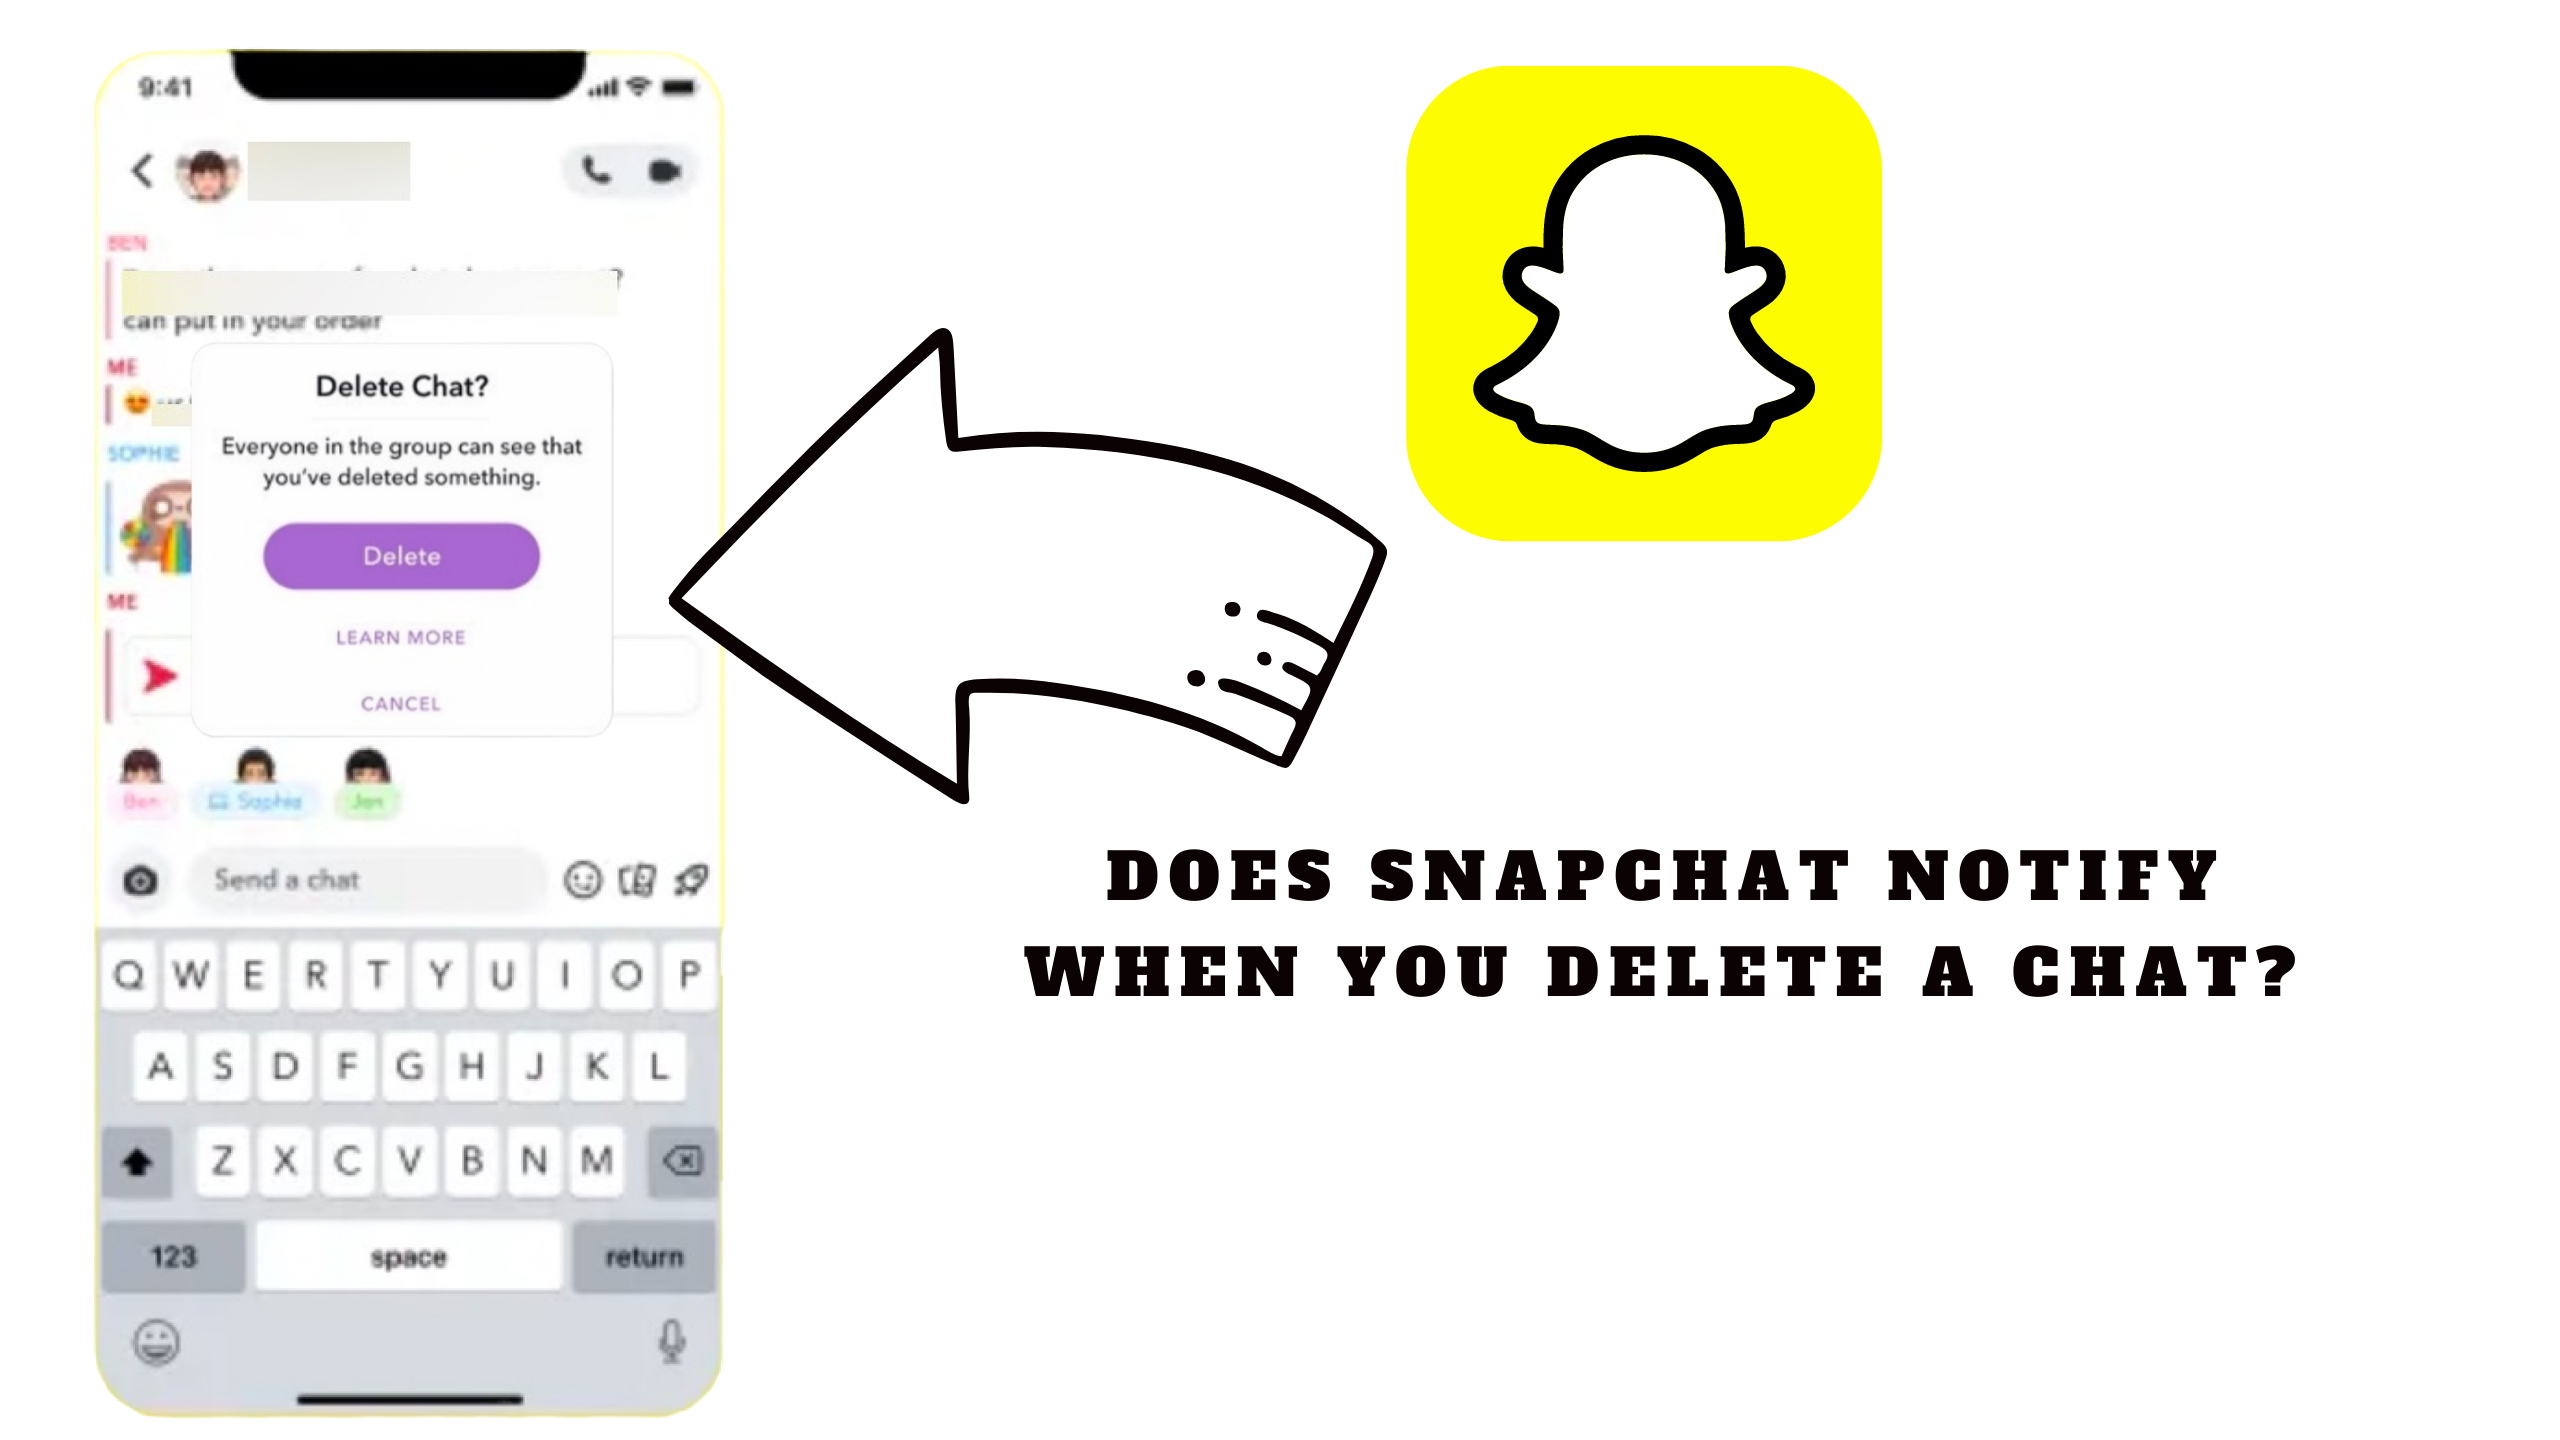 Does Snapchat Notify When You Delete a Chat?